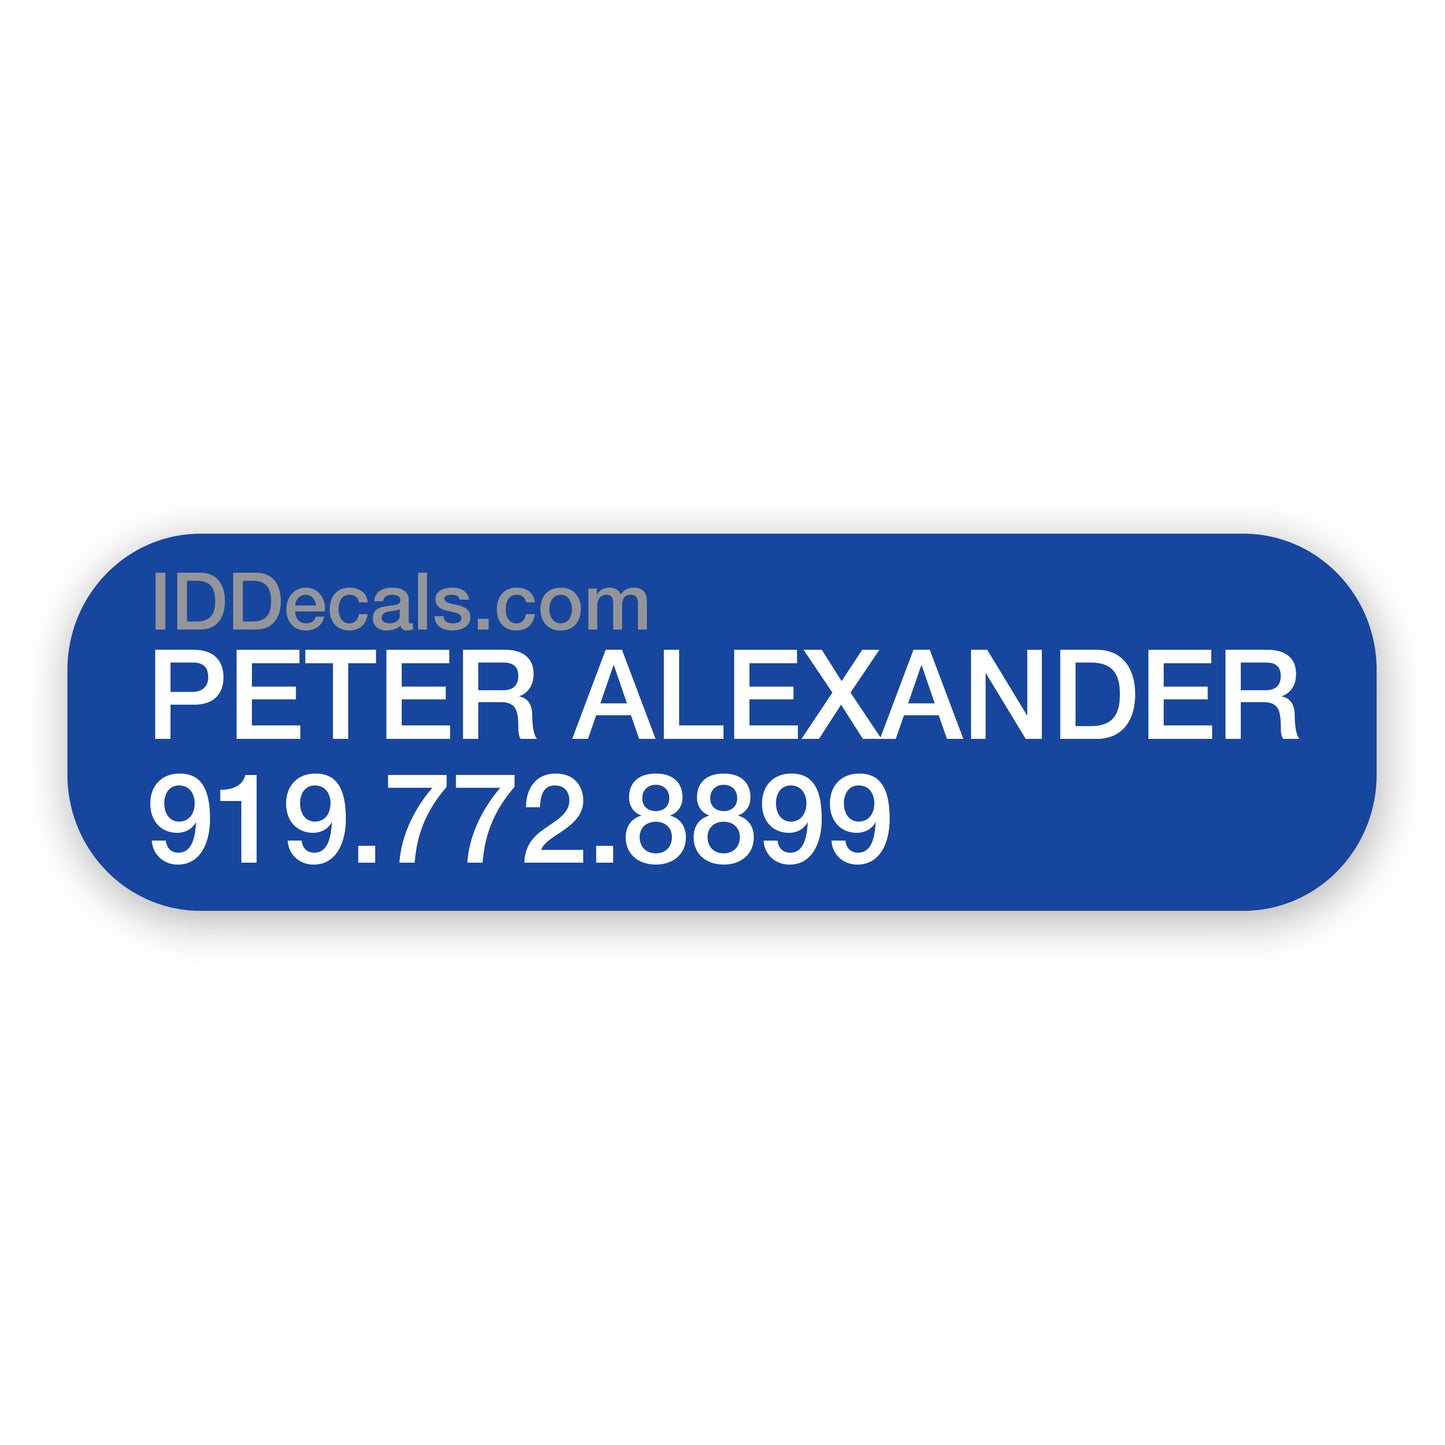 Premium vinyl identification sticker with customizable text, featuring two lines of personalized information - white text on colored background.